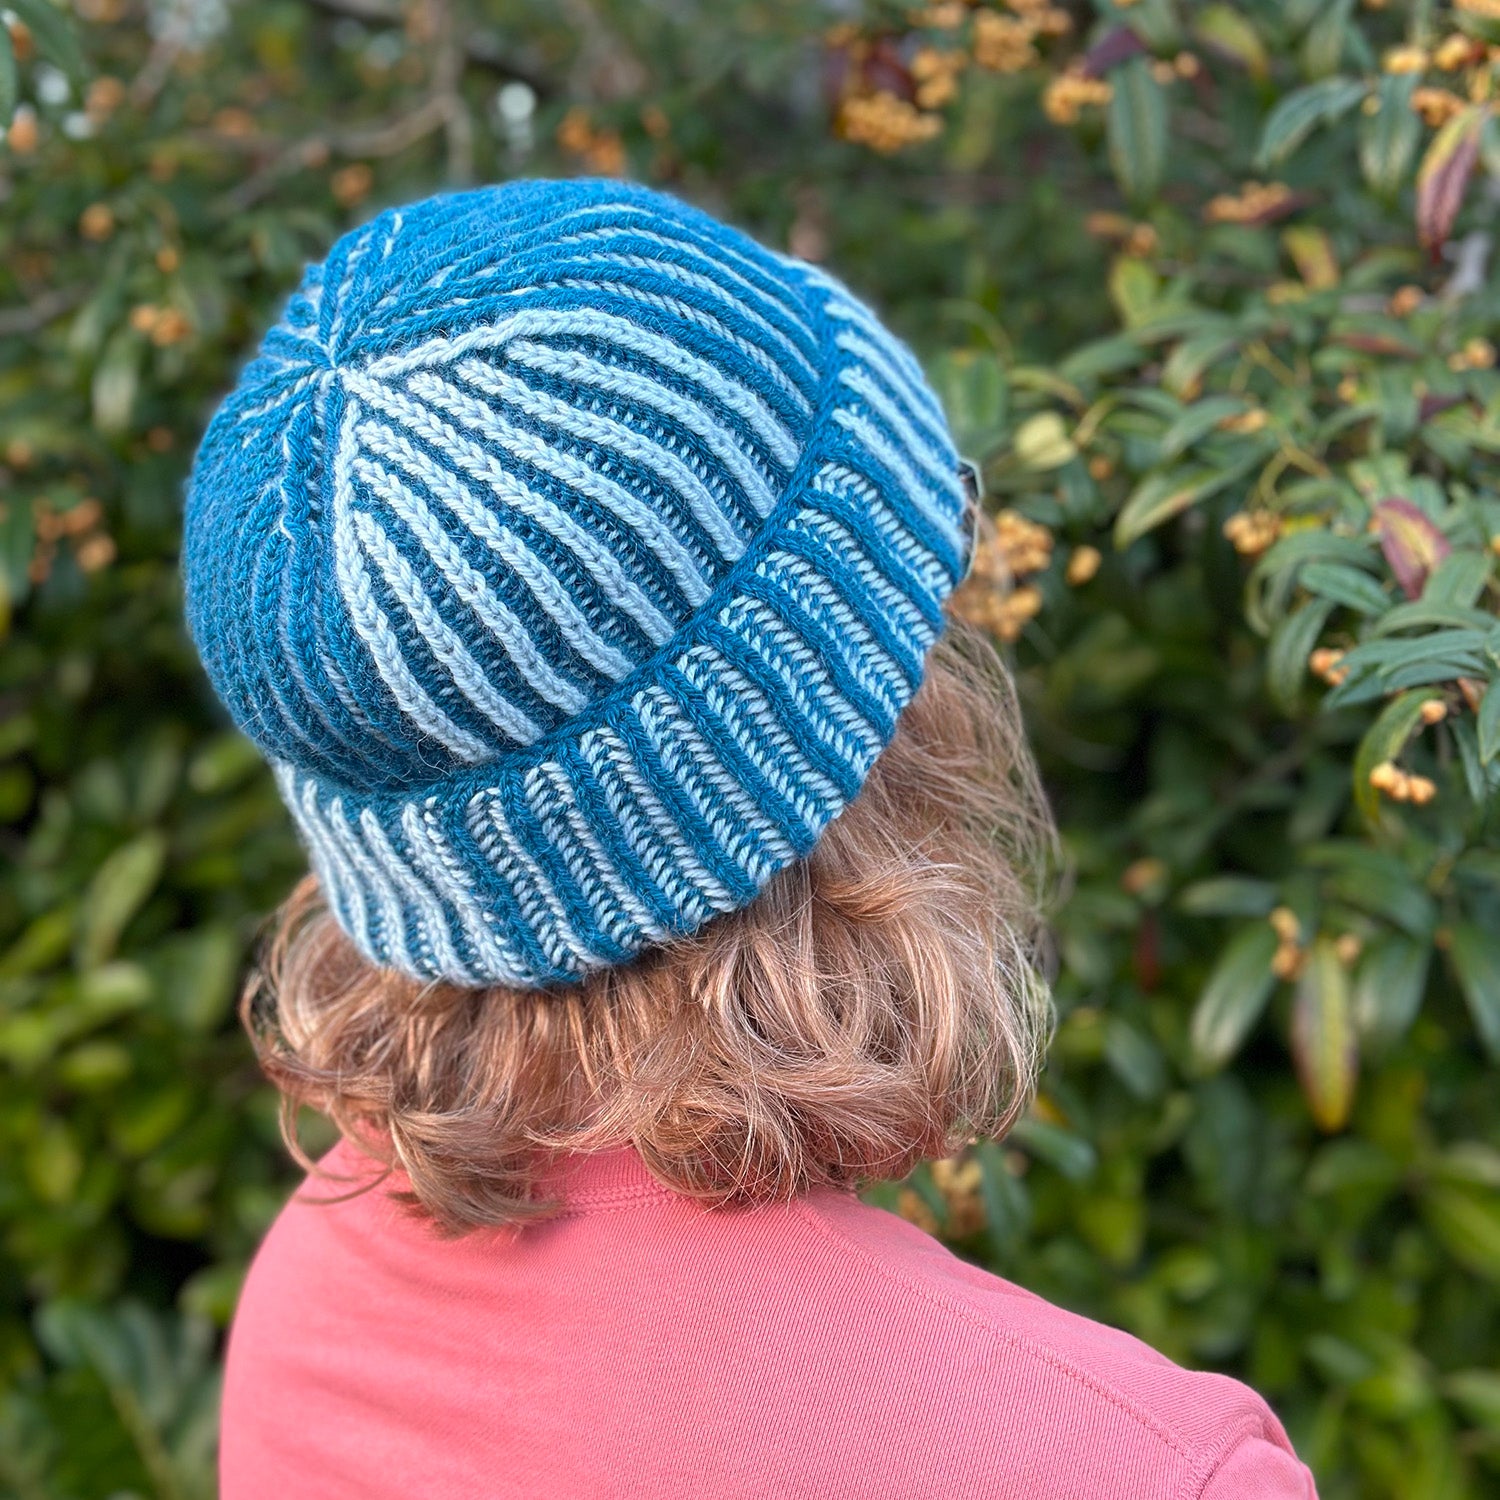 Staff Project: Knitted brioche hat in Lily Kate Axis Worsted